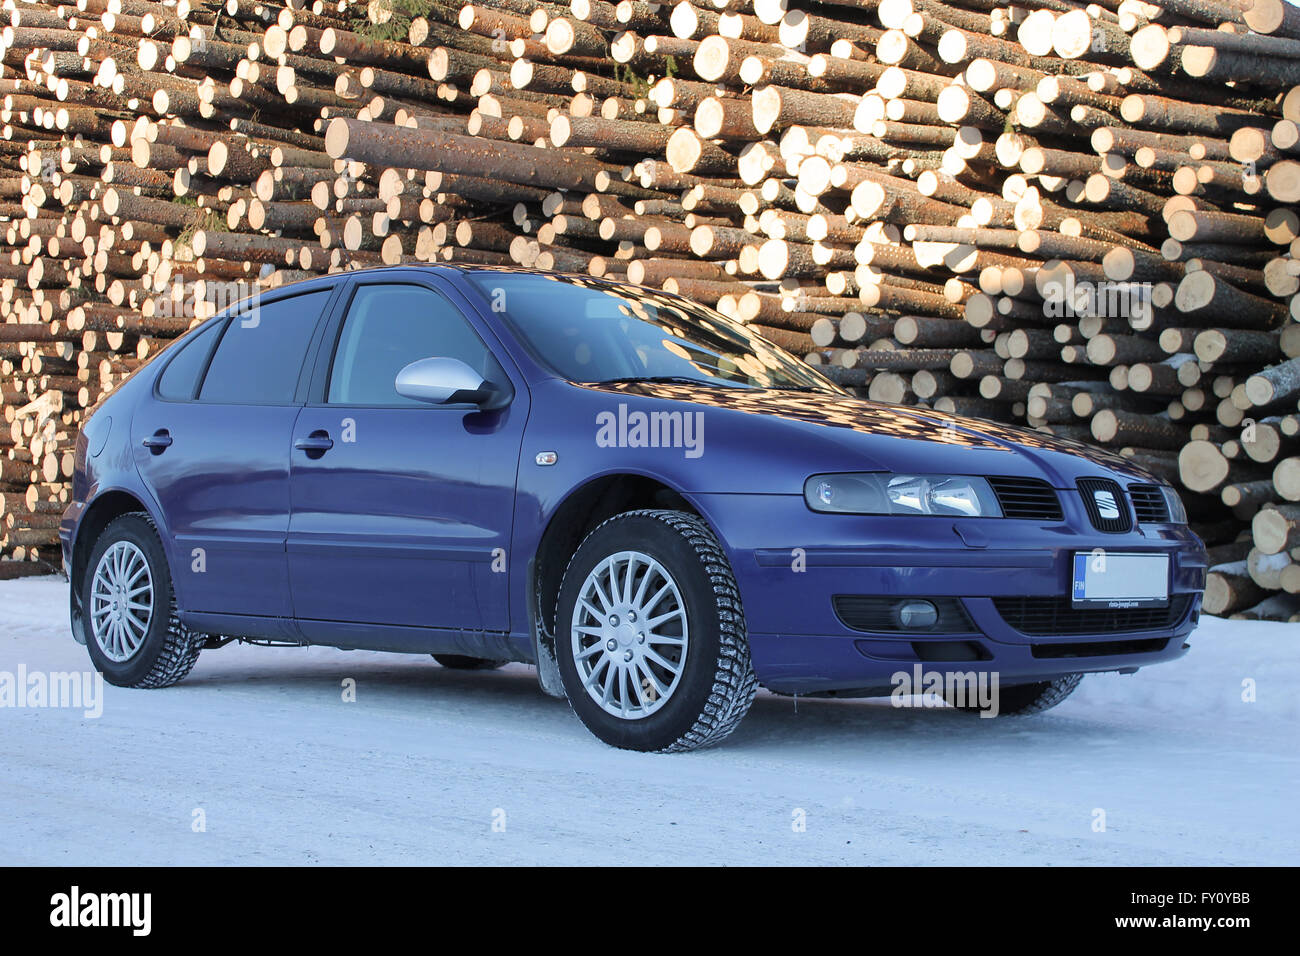 Blue Seat Leon 2005 in front of a pile of stock Stock Photo